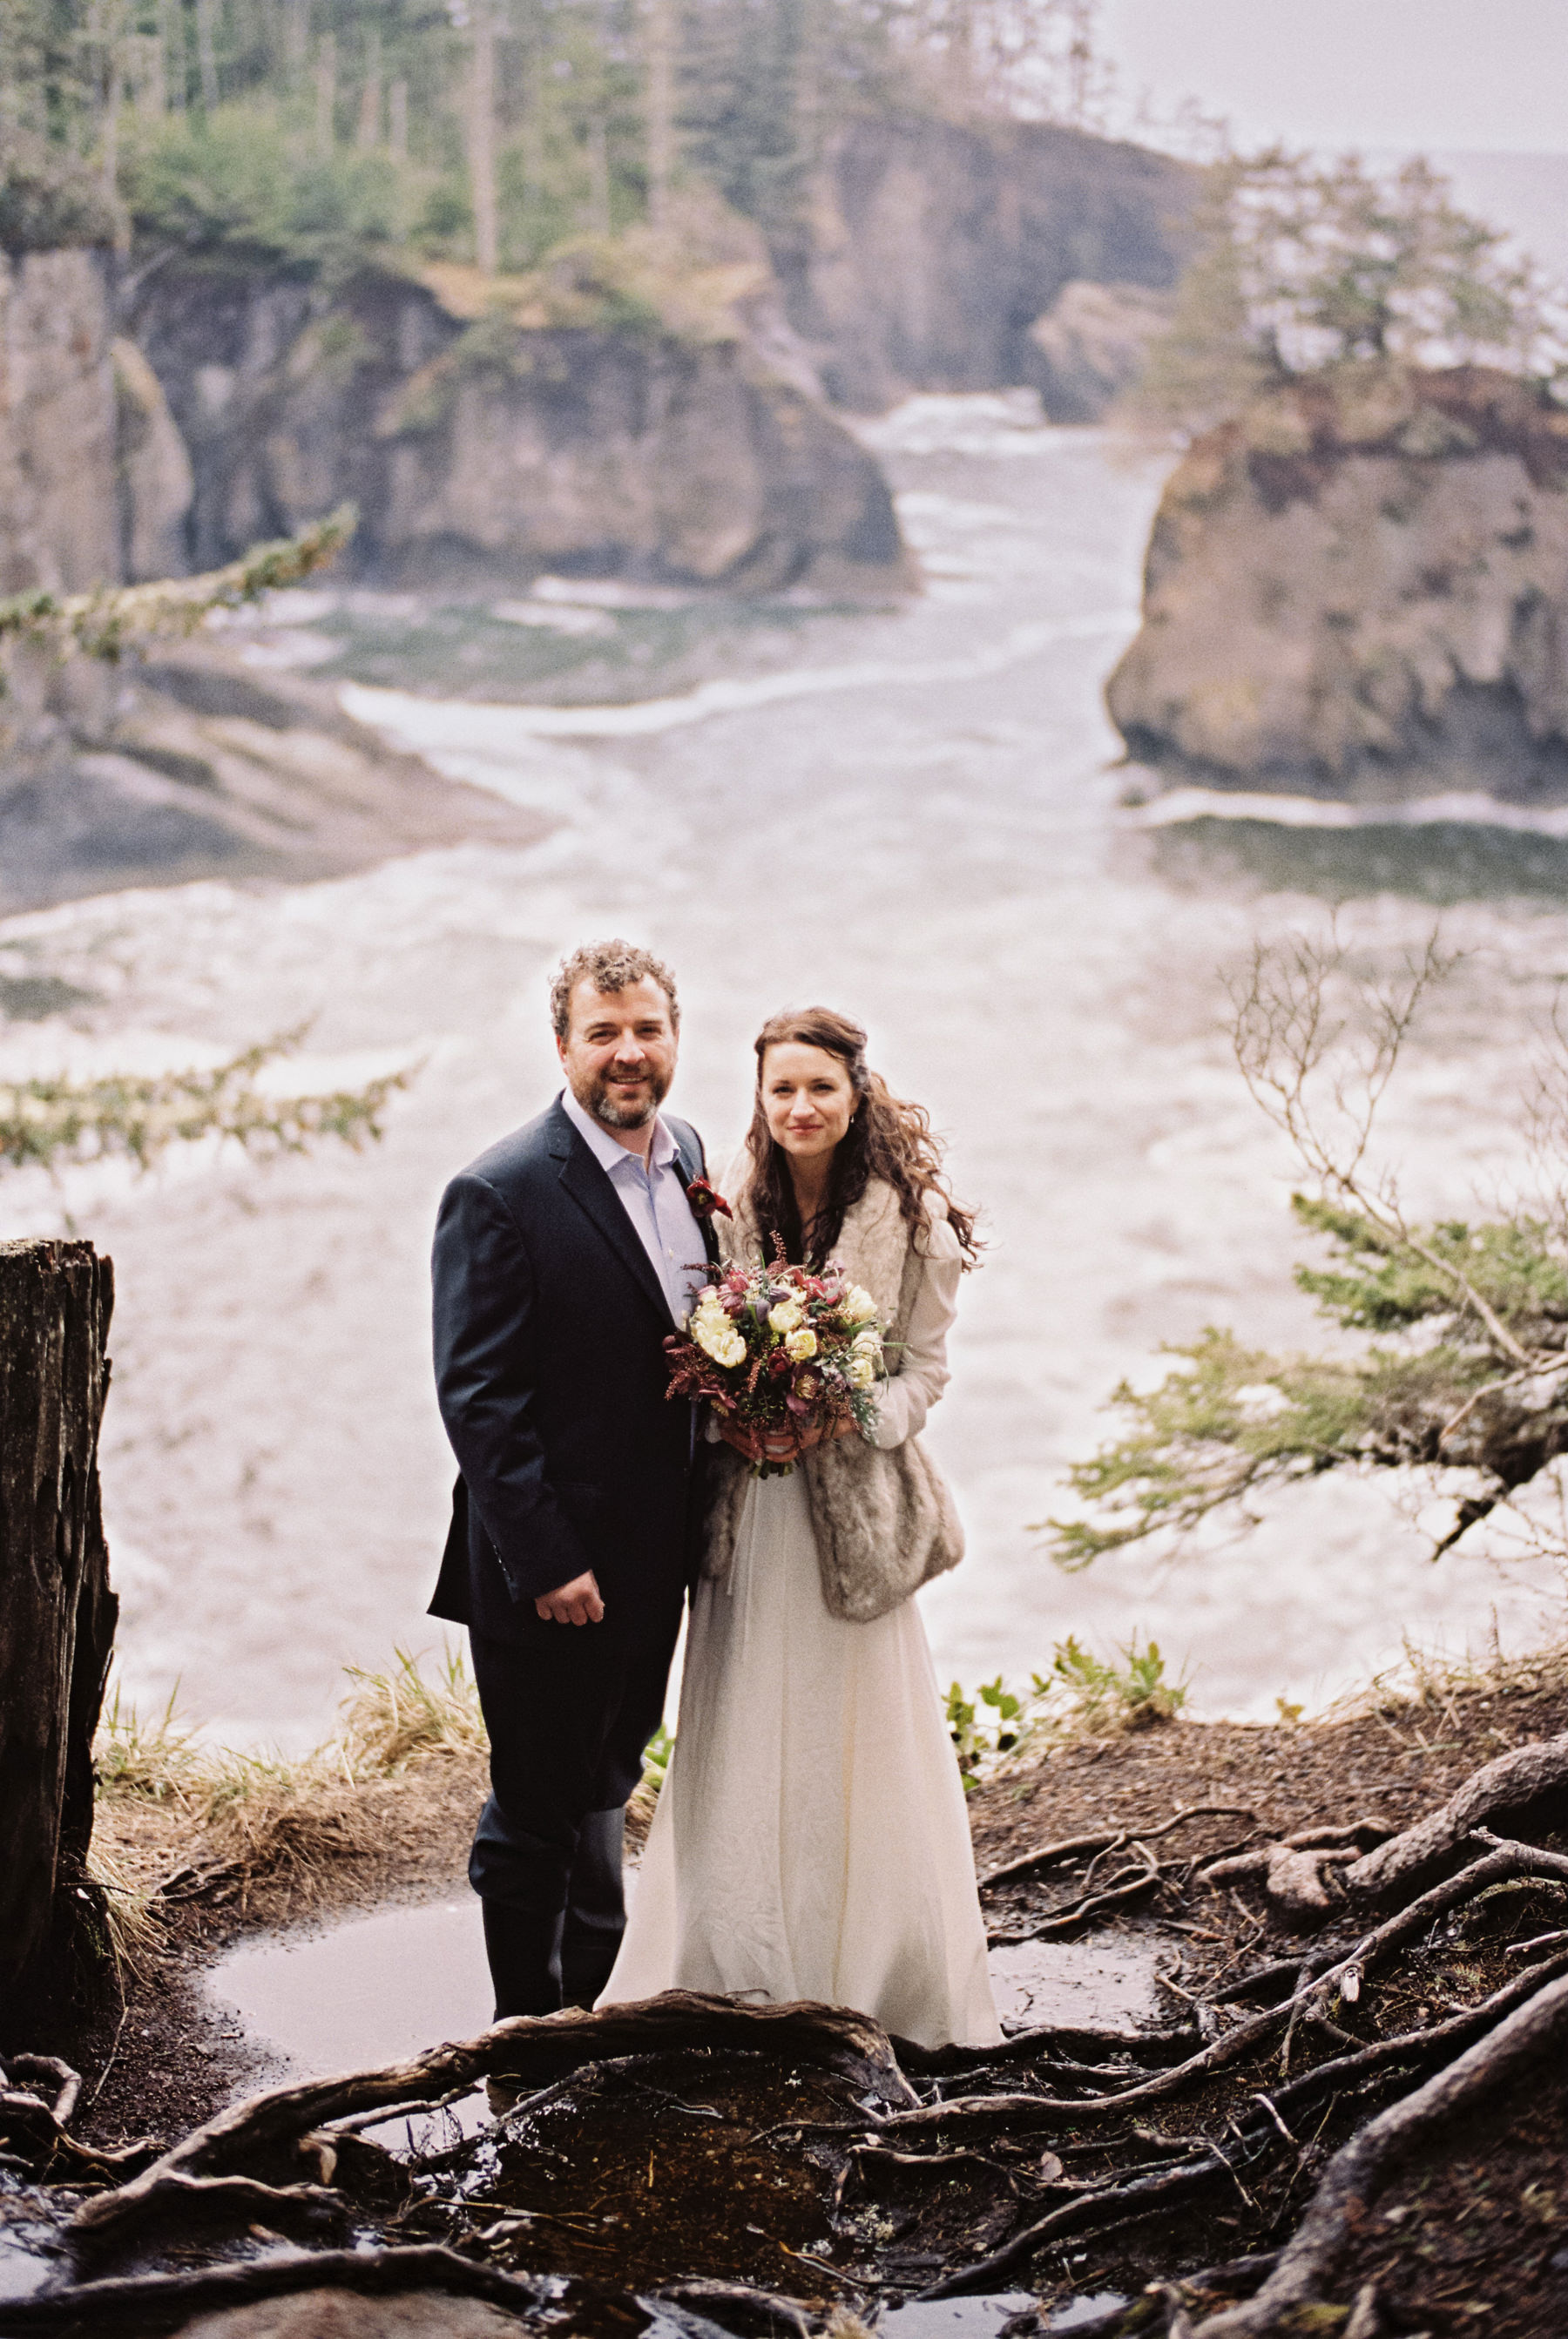 168-cloudy-pnw-elopement-on-film-at-cape-flattery-in-washington.jpg